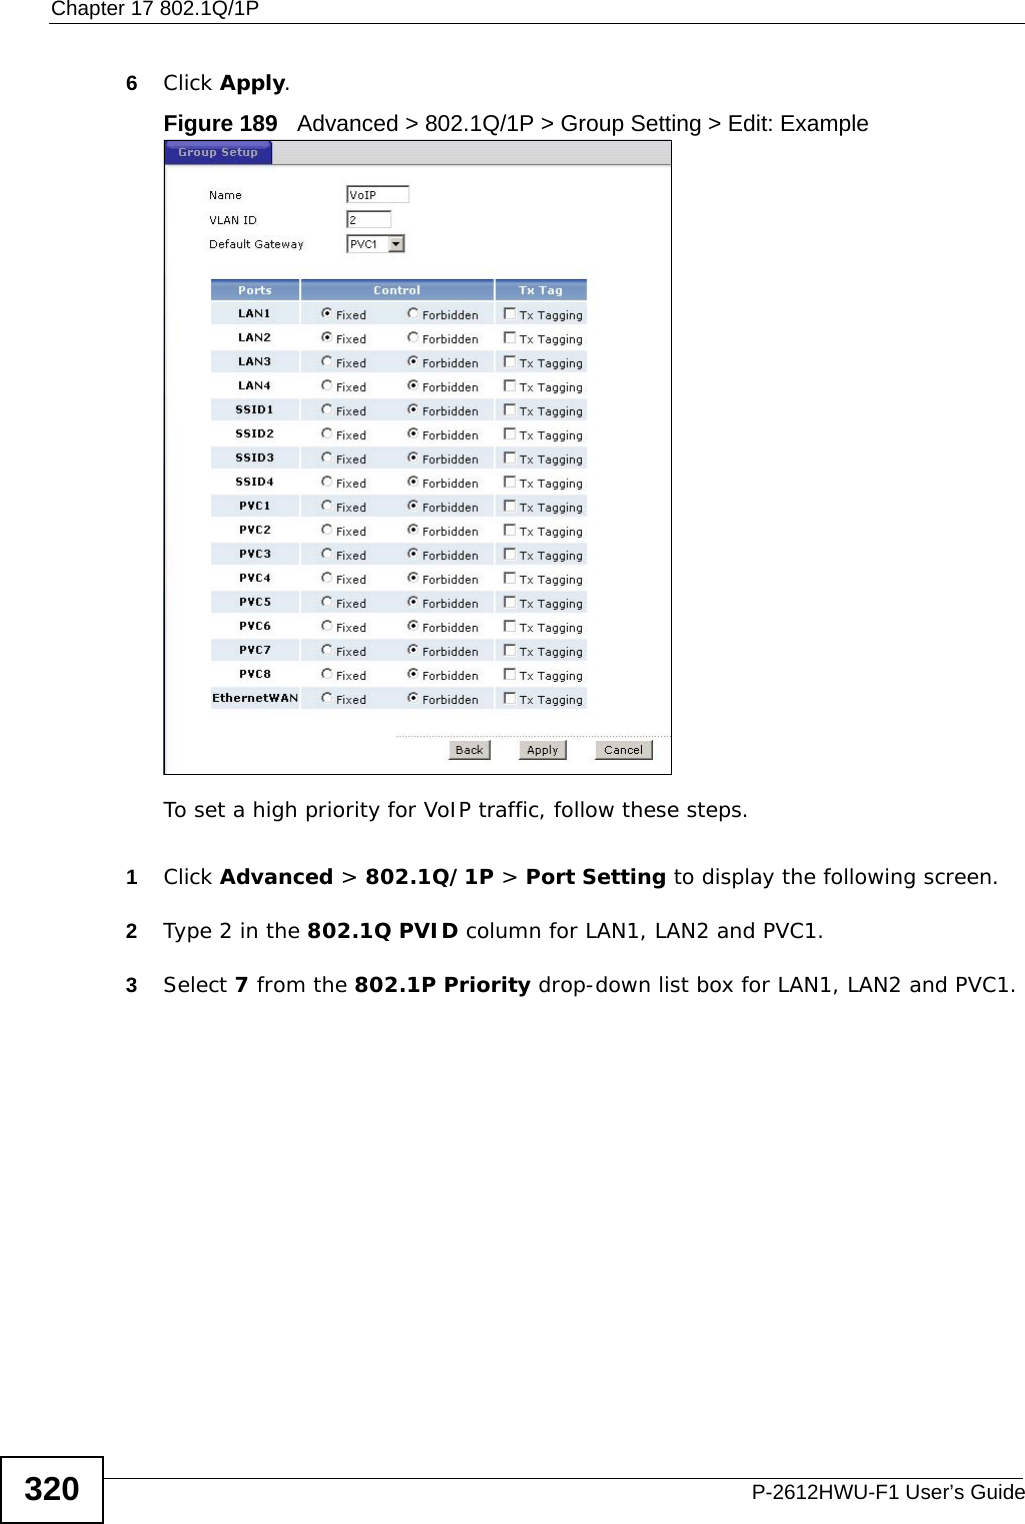 Chapter 17 802.1Q/1PP-2612HWU-F1 User’s Guide3206Click Apply.Figure 189   Advanced &gt; 802.1Q/1P &gt; Group Setting &gt; Edit: ExampleTo set a high priority for VoIP traffic, follow these steps.1Click Advanced &gt; 802.1Q/1P &gt; Port Setting to display the following screen.2Type 2 in the 802.1Q PVID column for LAN1, LAN2 and PVC1.3Select 7 from the 802.1P Priority drop-down list box for LAN1, LAN2 and PVC1.